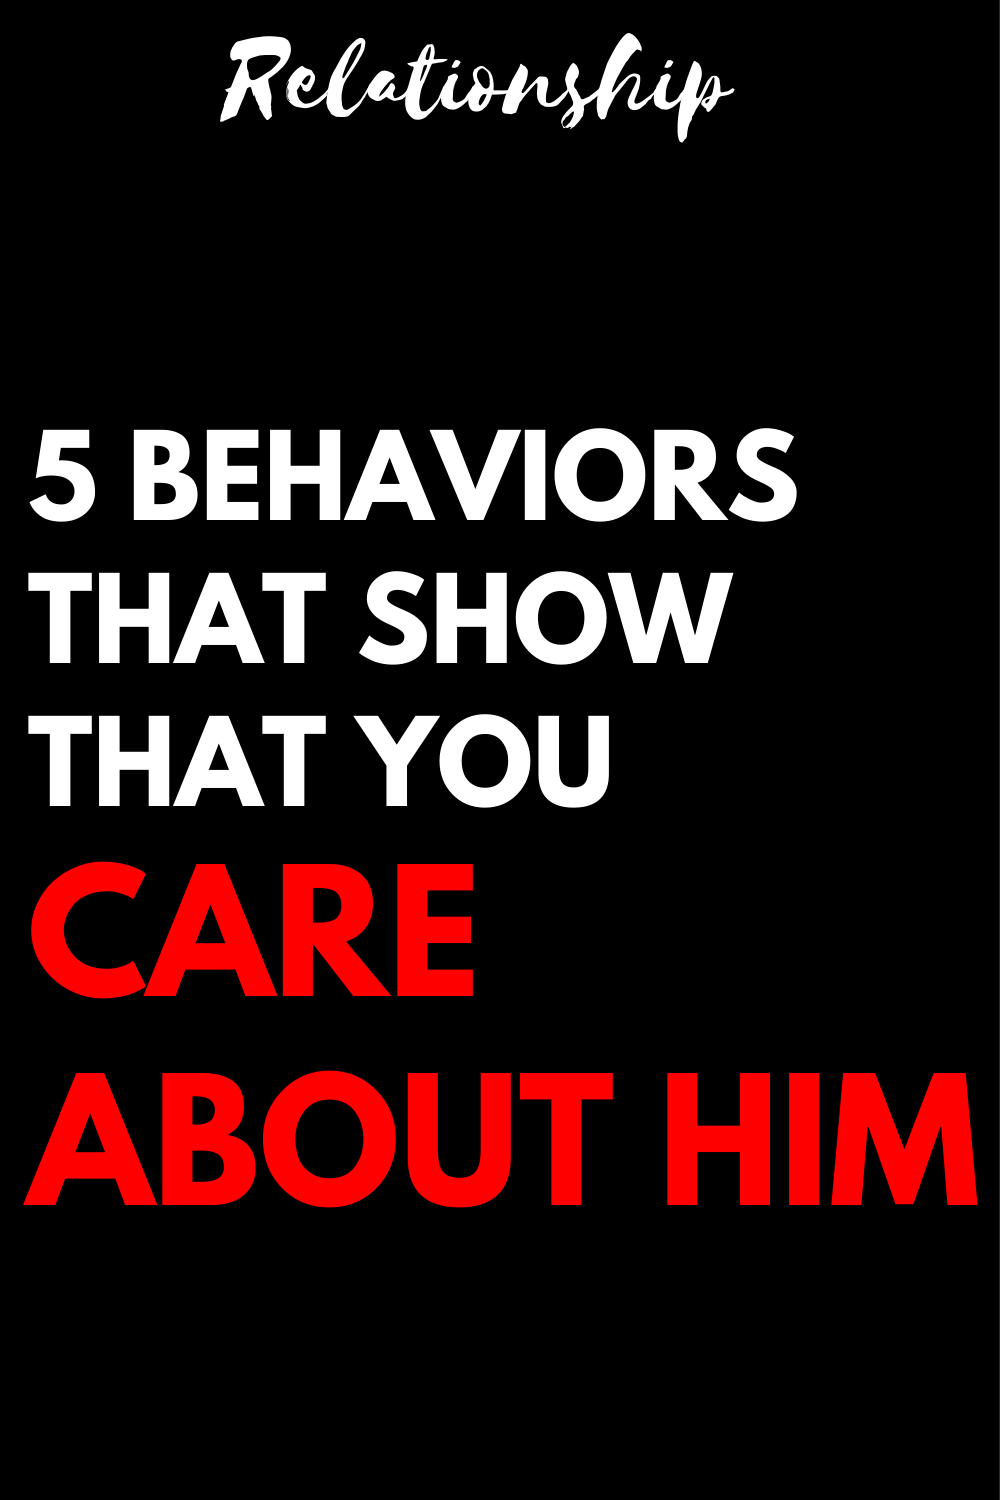 5 behaviors that show that you care about him